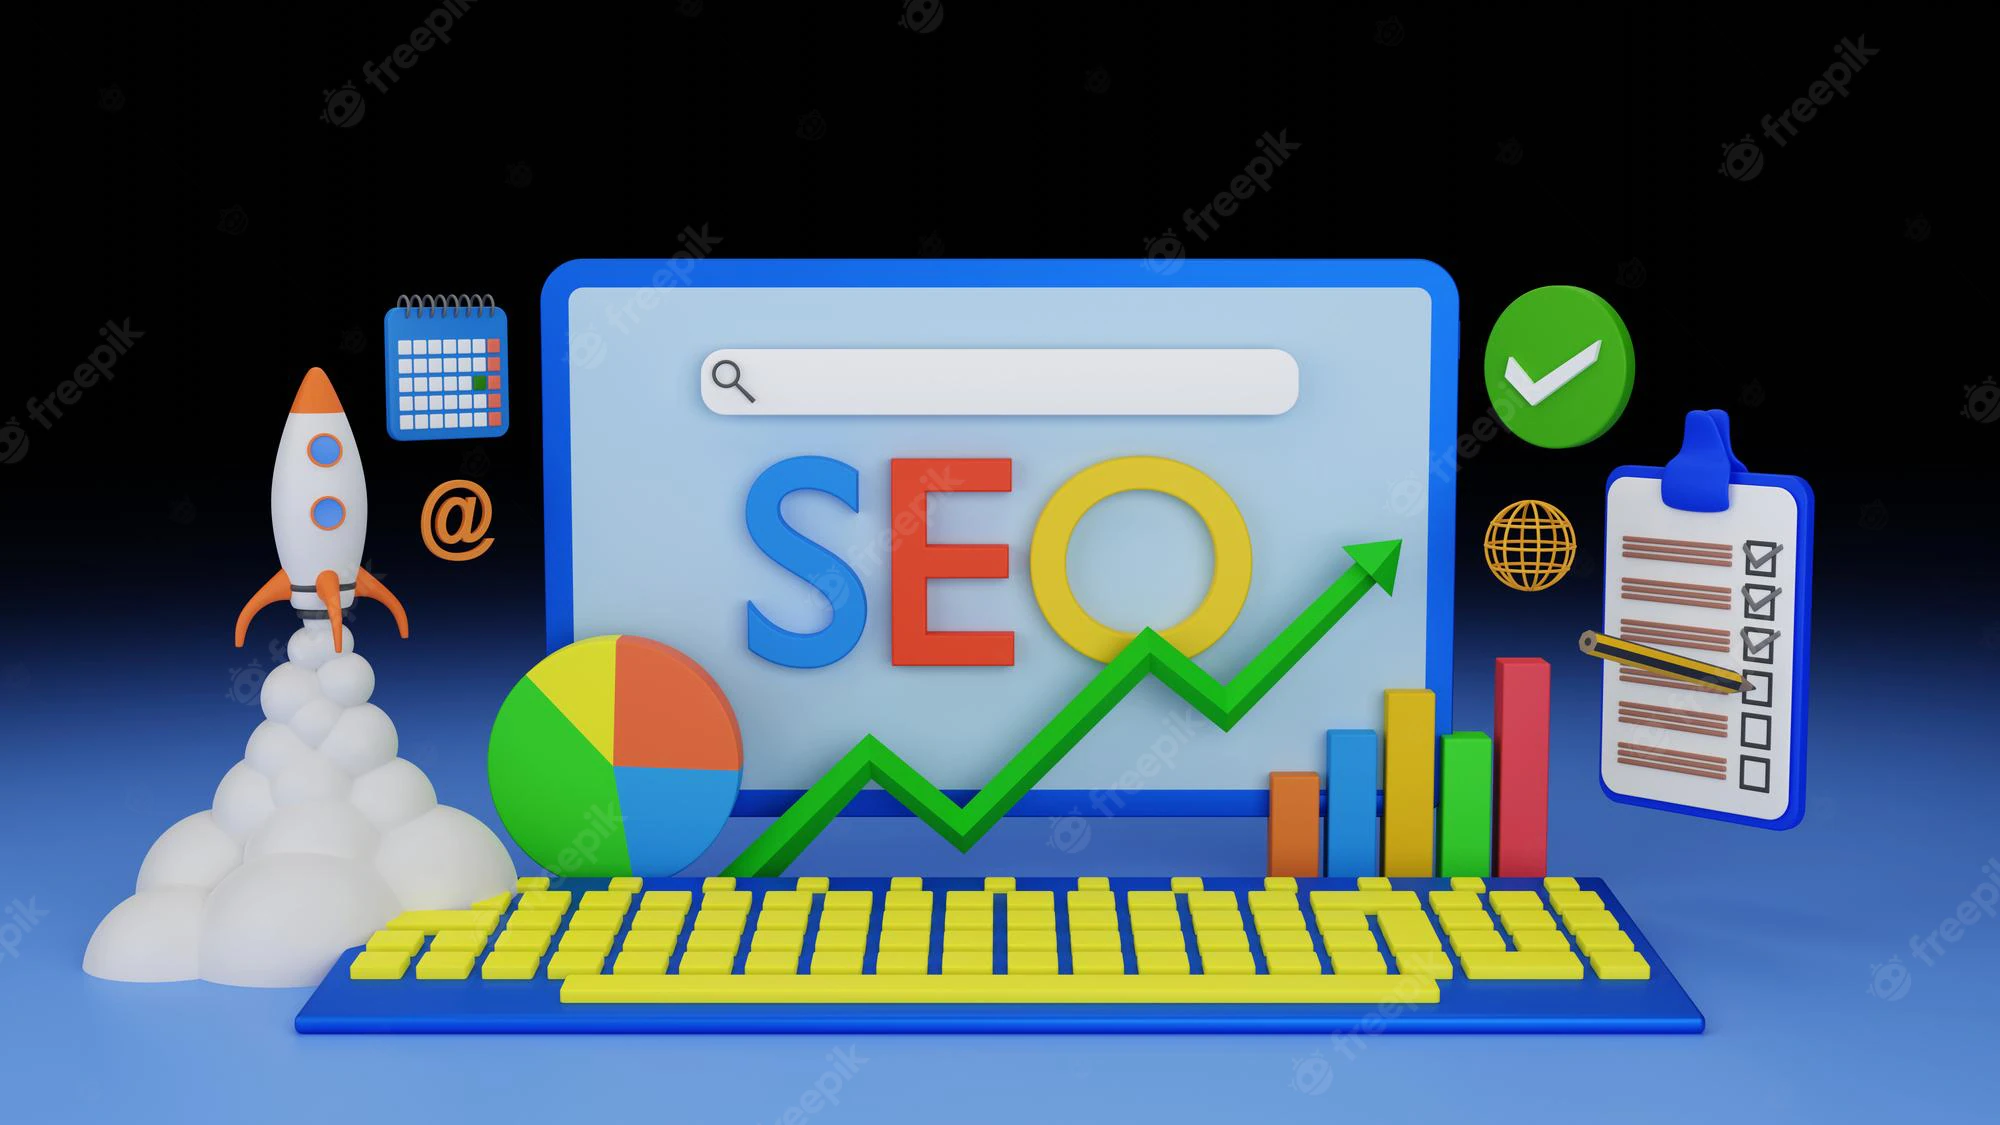 SEO consultant can grow your business